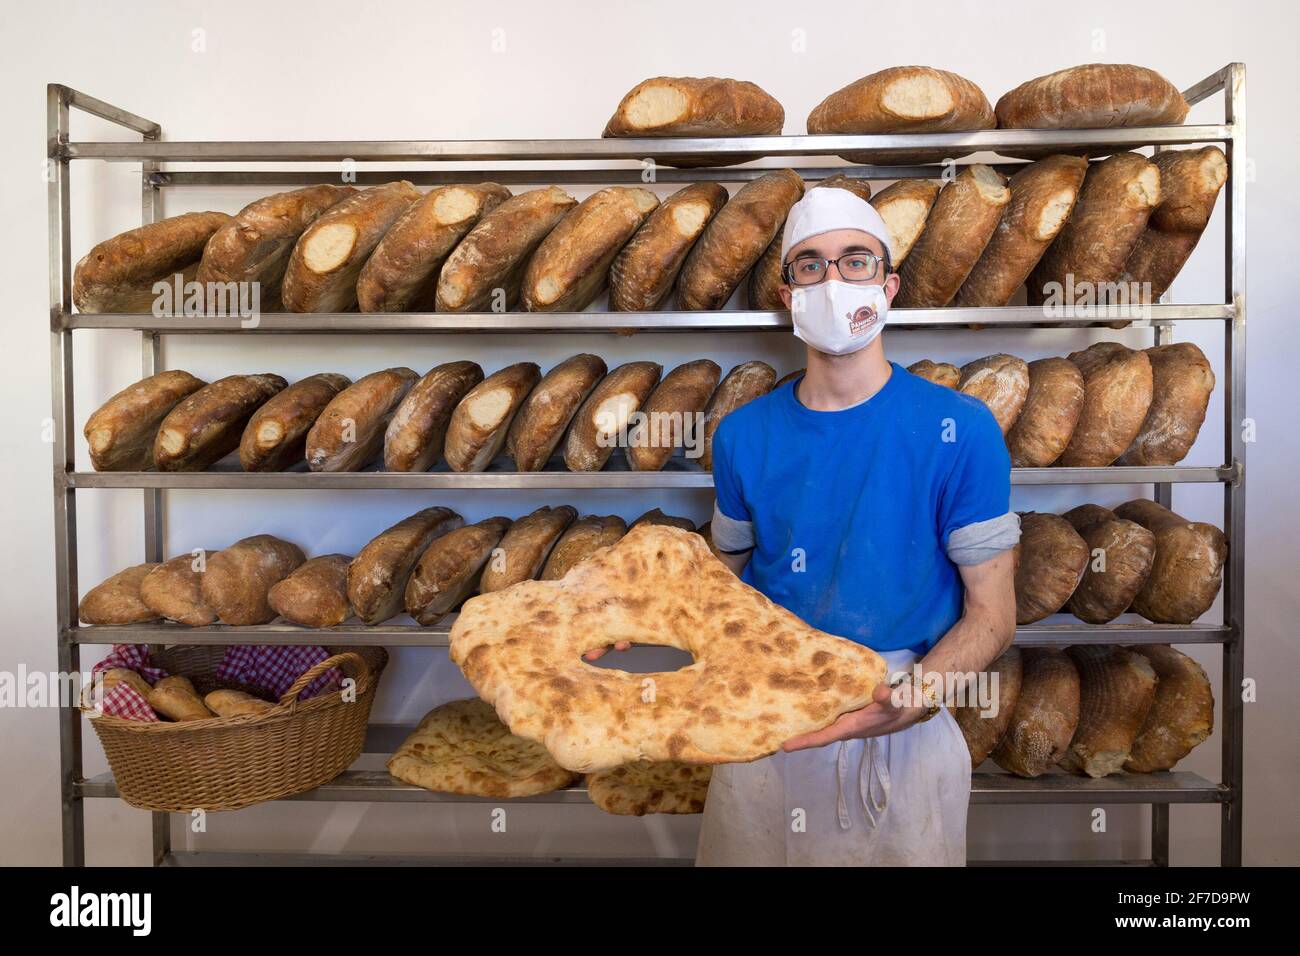 Trivento(CB),Molise Region,Italy:The son of the owner of the San Giuseppe bakery, located in the industrial area of Trvento (CB), with the typical foc Stock Photo